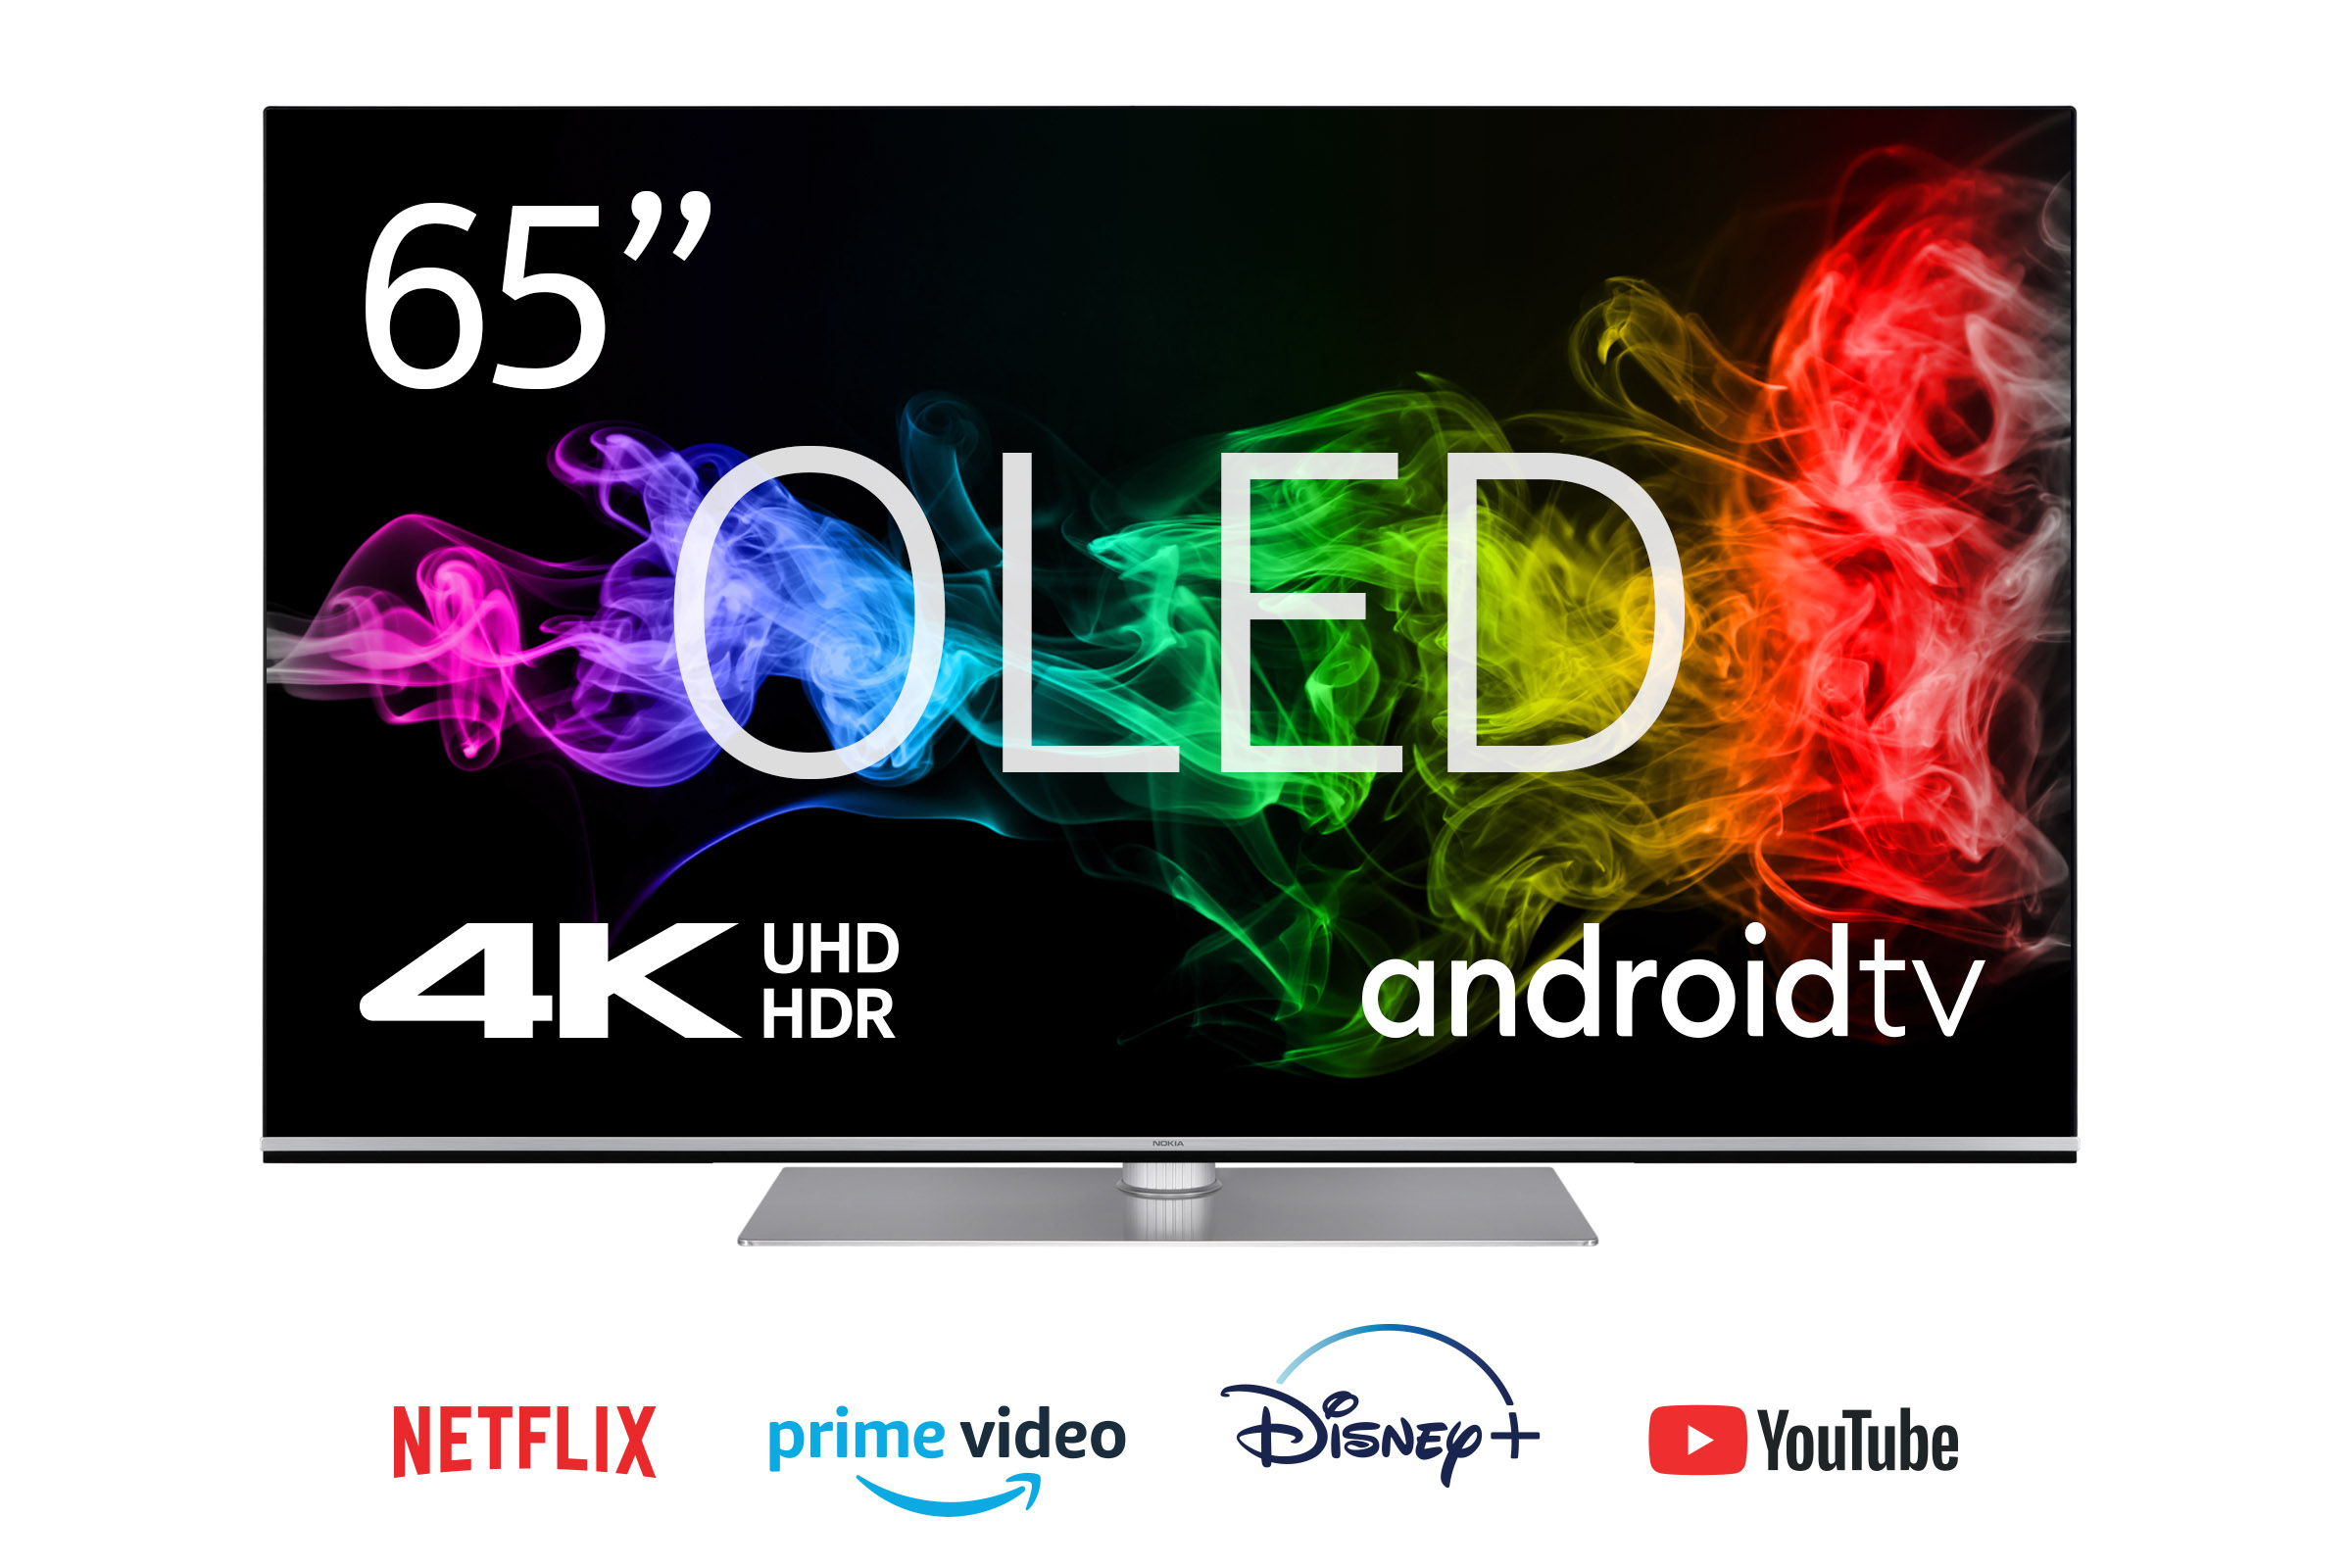 Nokia 65”4K UHD OLED Smart TV with Android TV